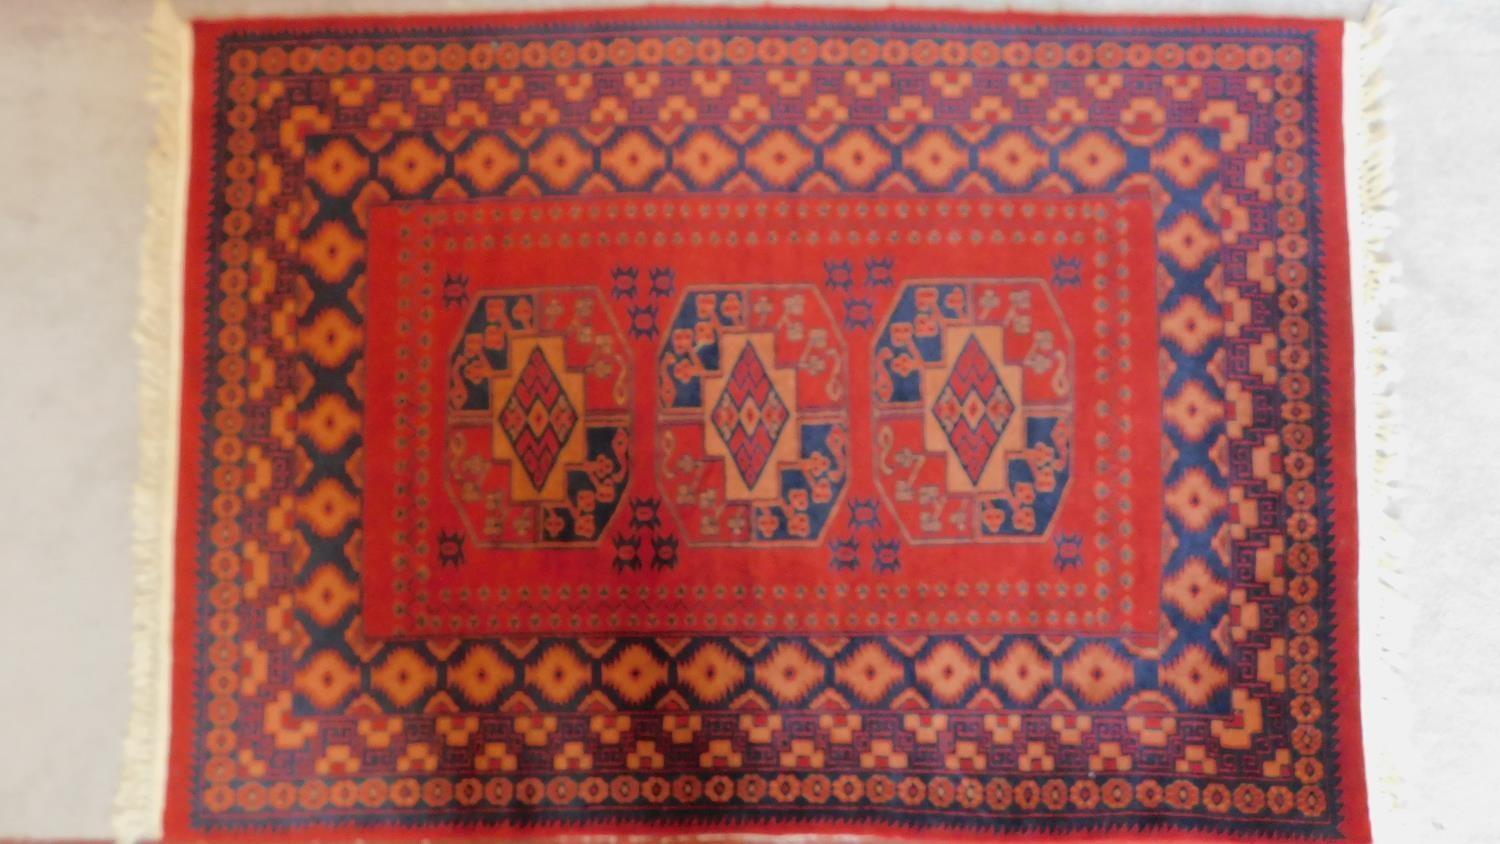 A Persian style rug with triple pendant medallions on a terracotta field surrounded by repeating